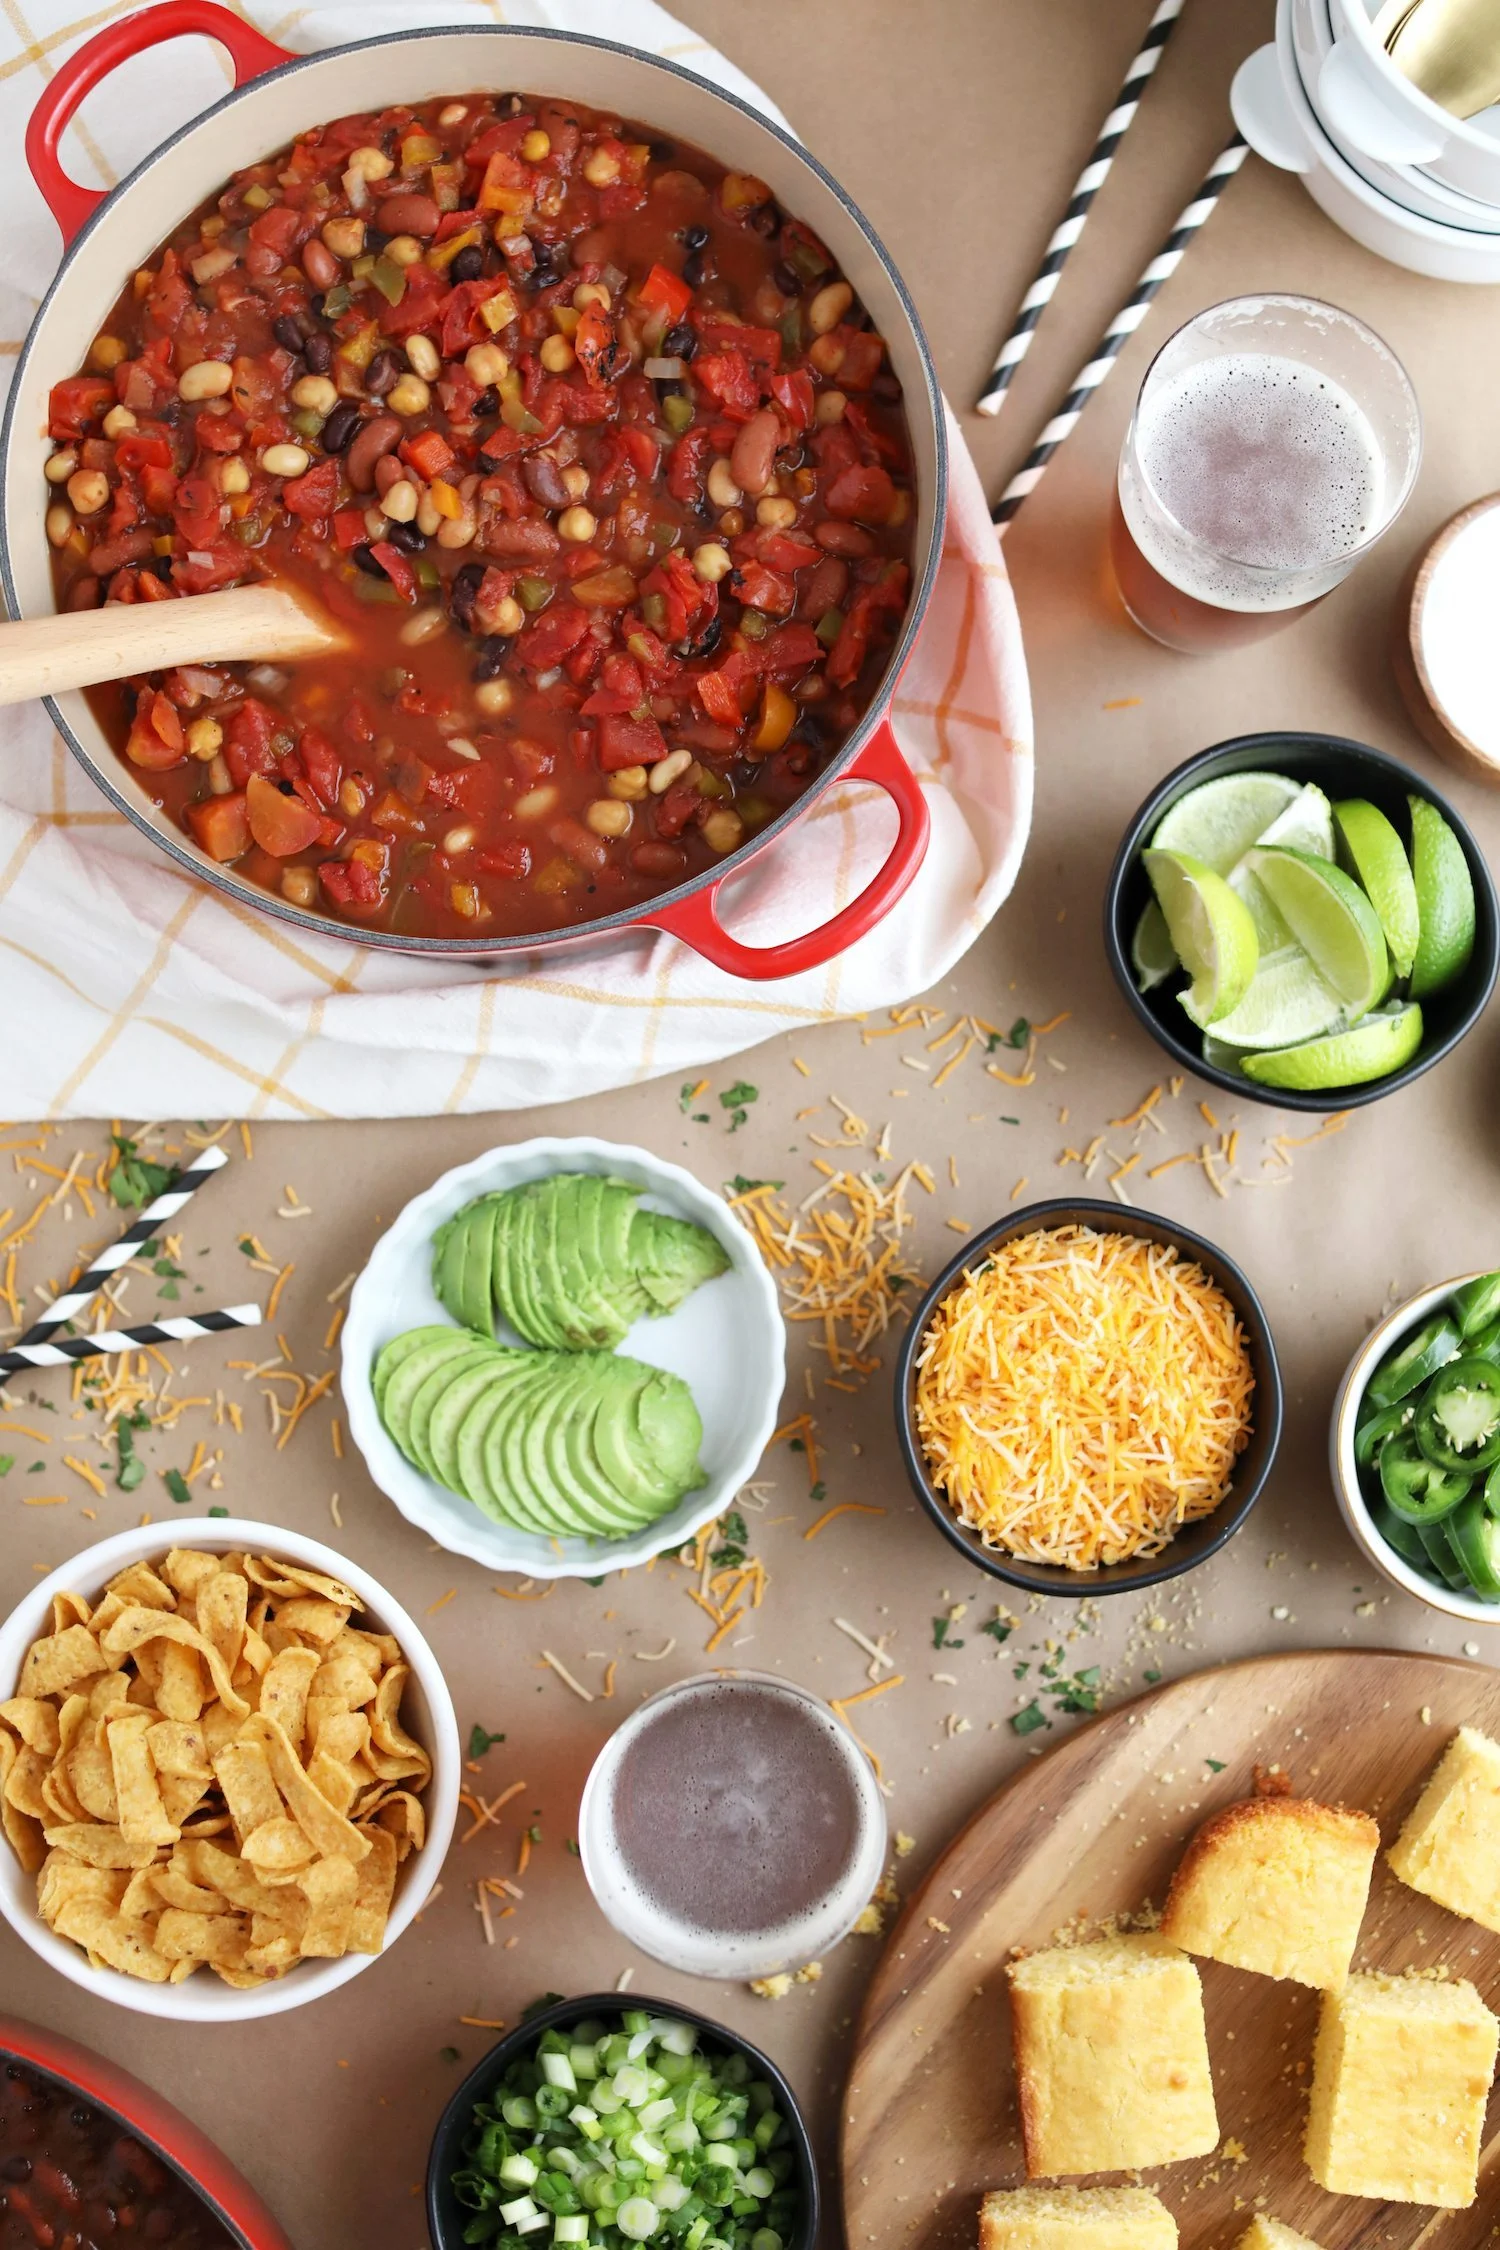 Host a Game Day Chili Cook-Off | Game Day party ideas from @cydconverse and @uber #DesignatedRider